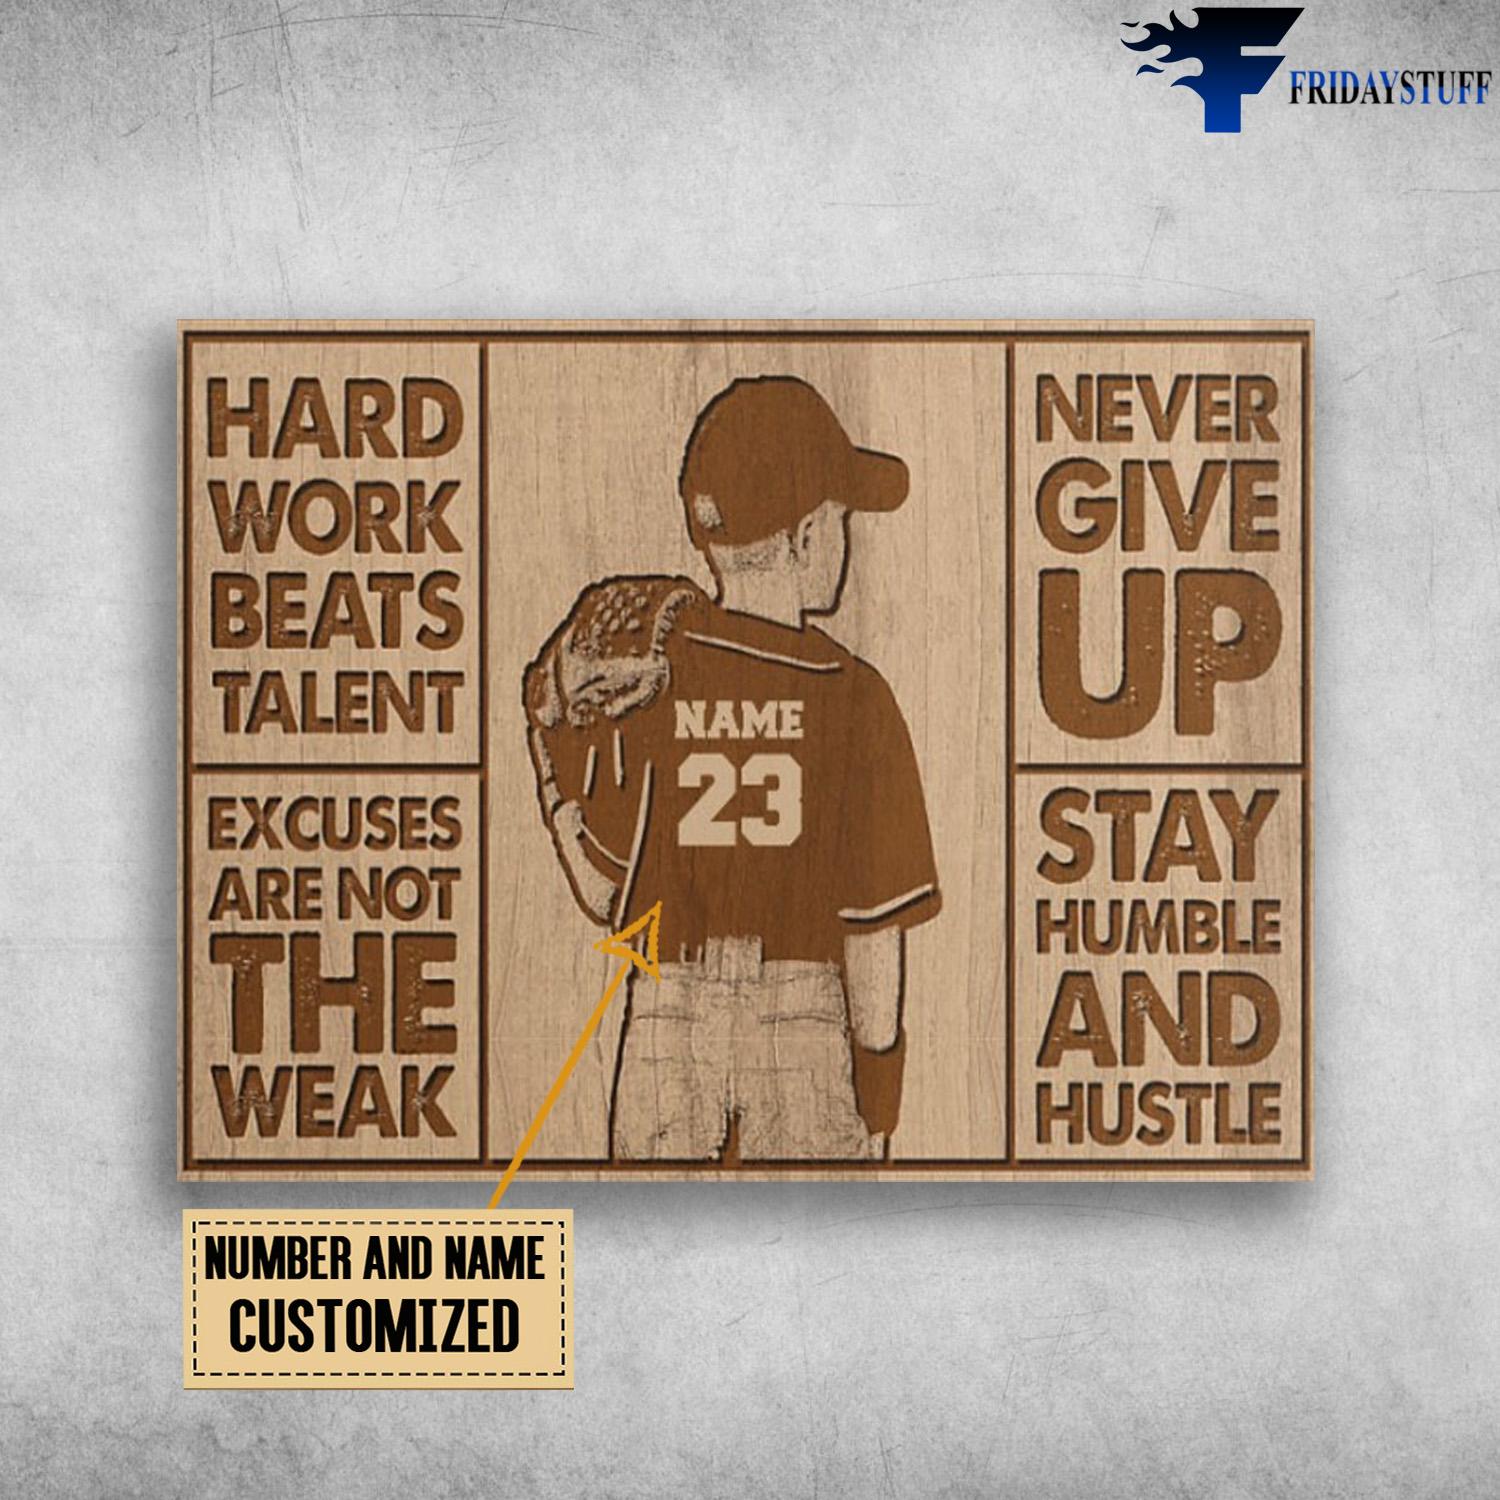 Baseball Boy, Baseball Lover, Hard Work Beats Talent, Excuses Are Not The Weak, Never Give Up, Stay Humble And Hustle